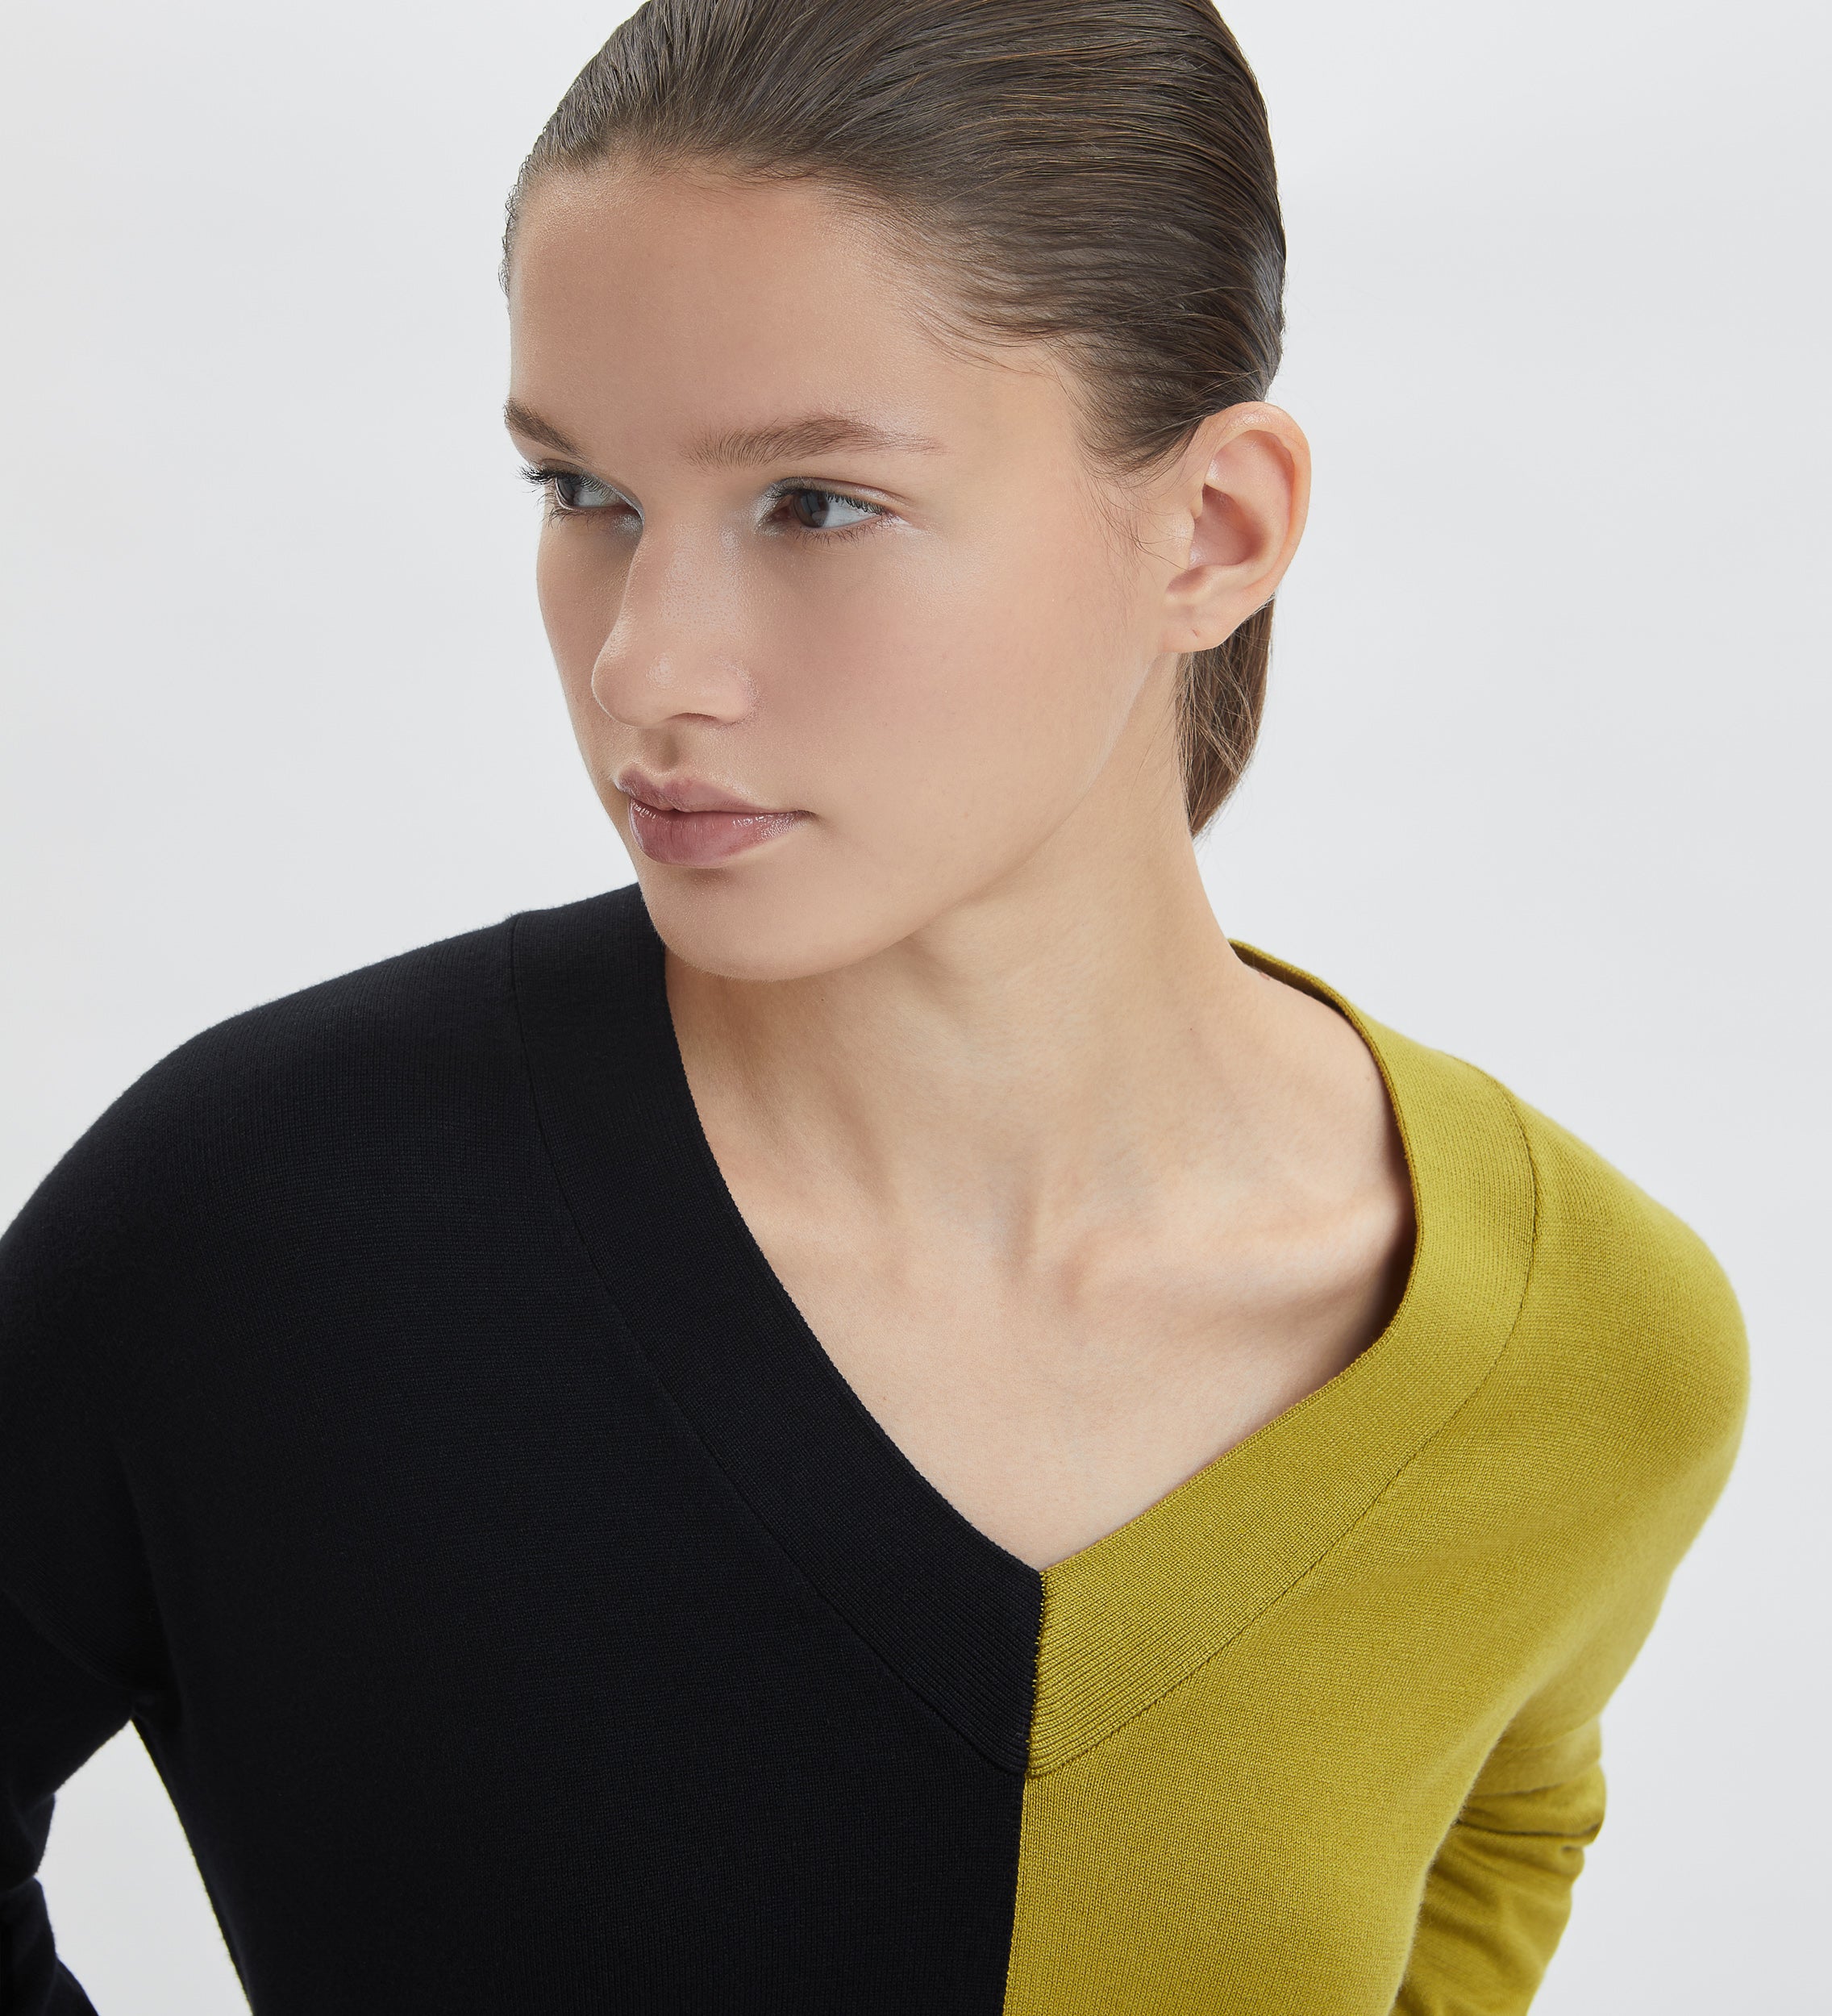 Two-tone V-neck sweater